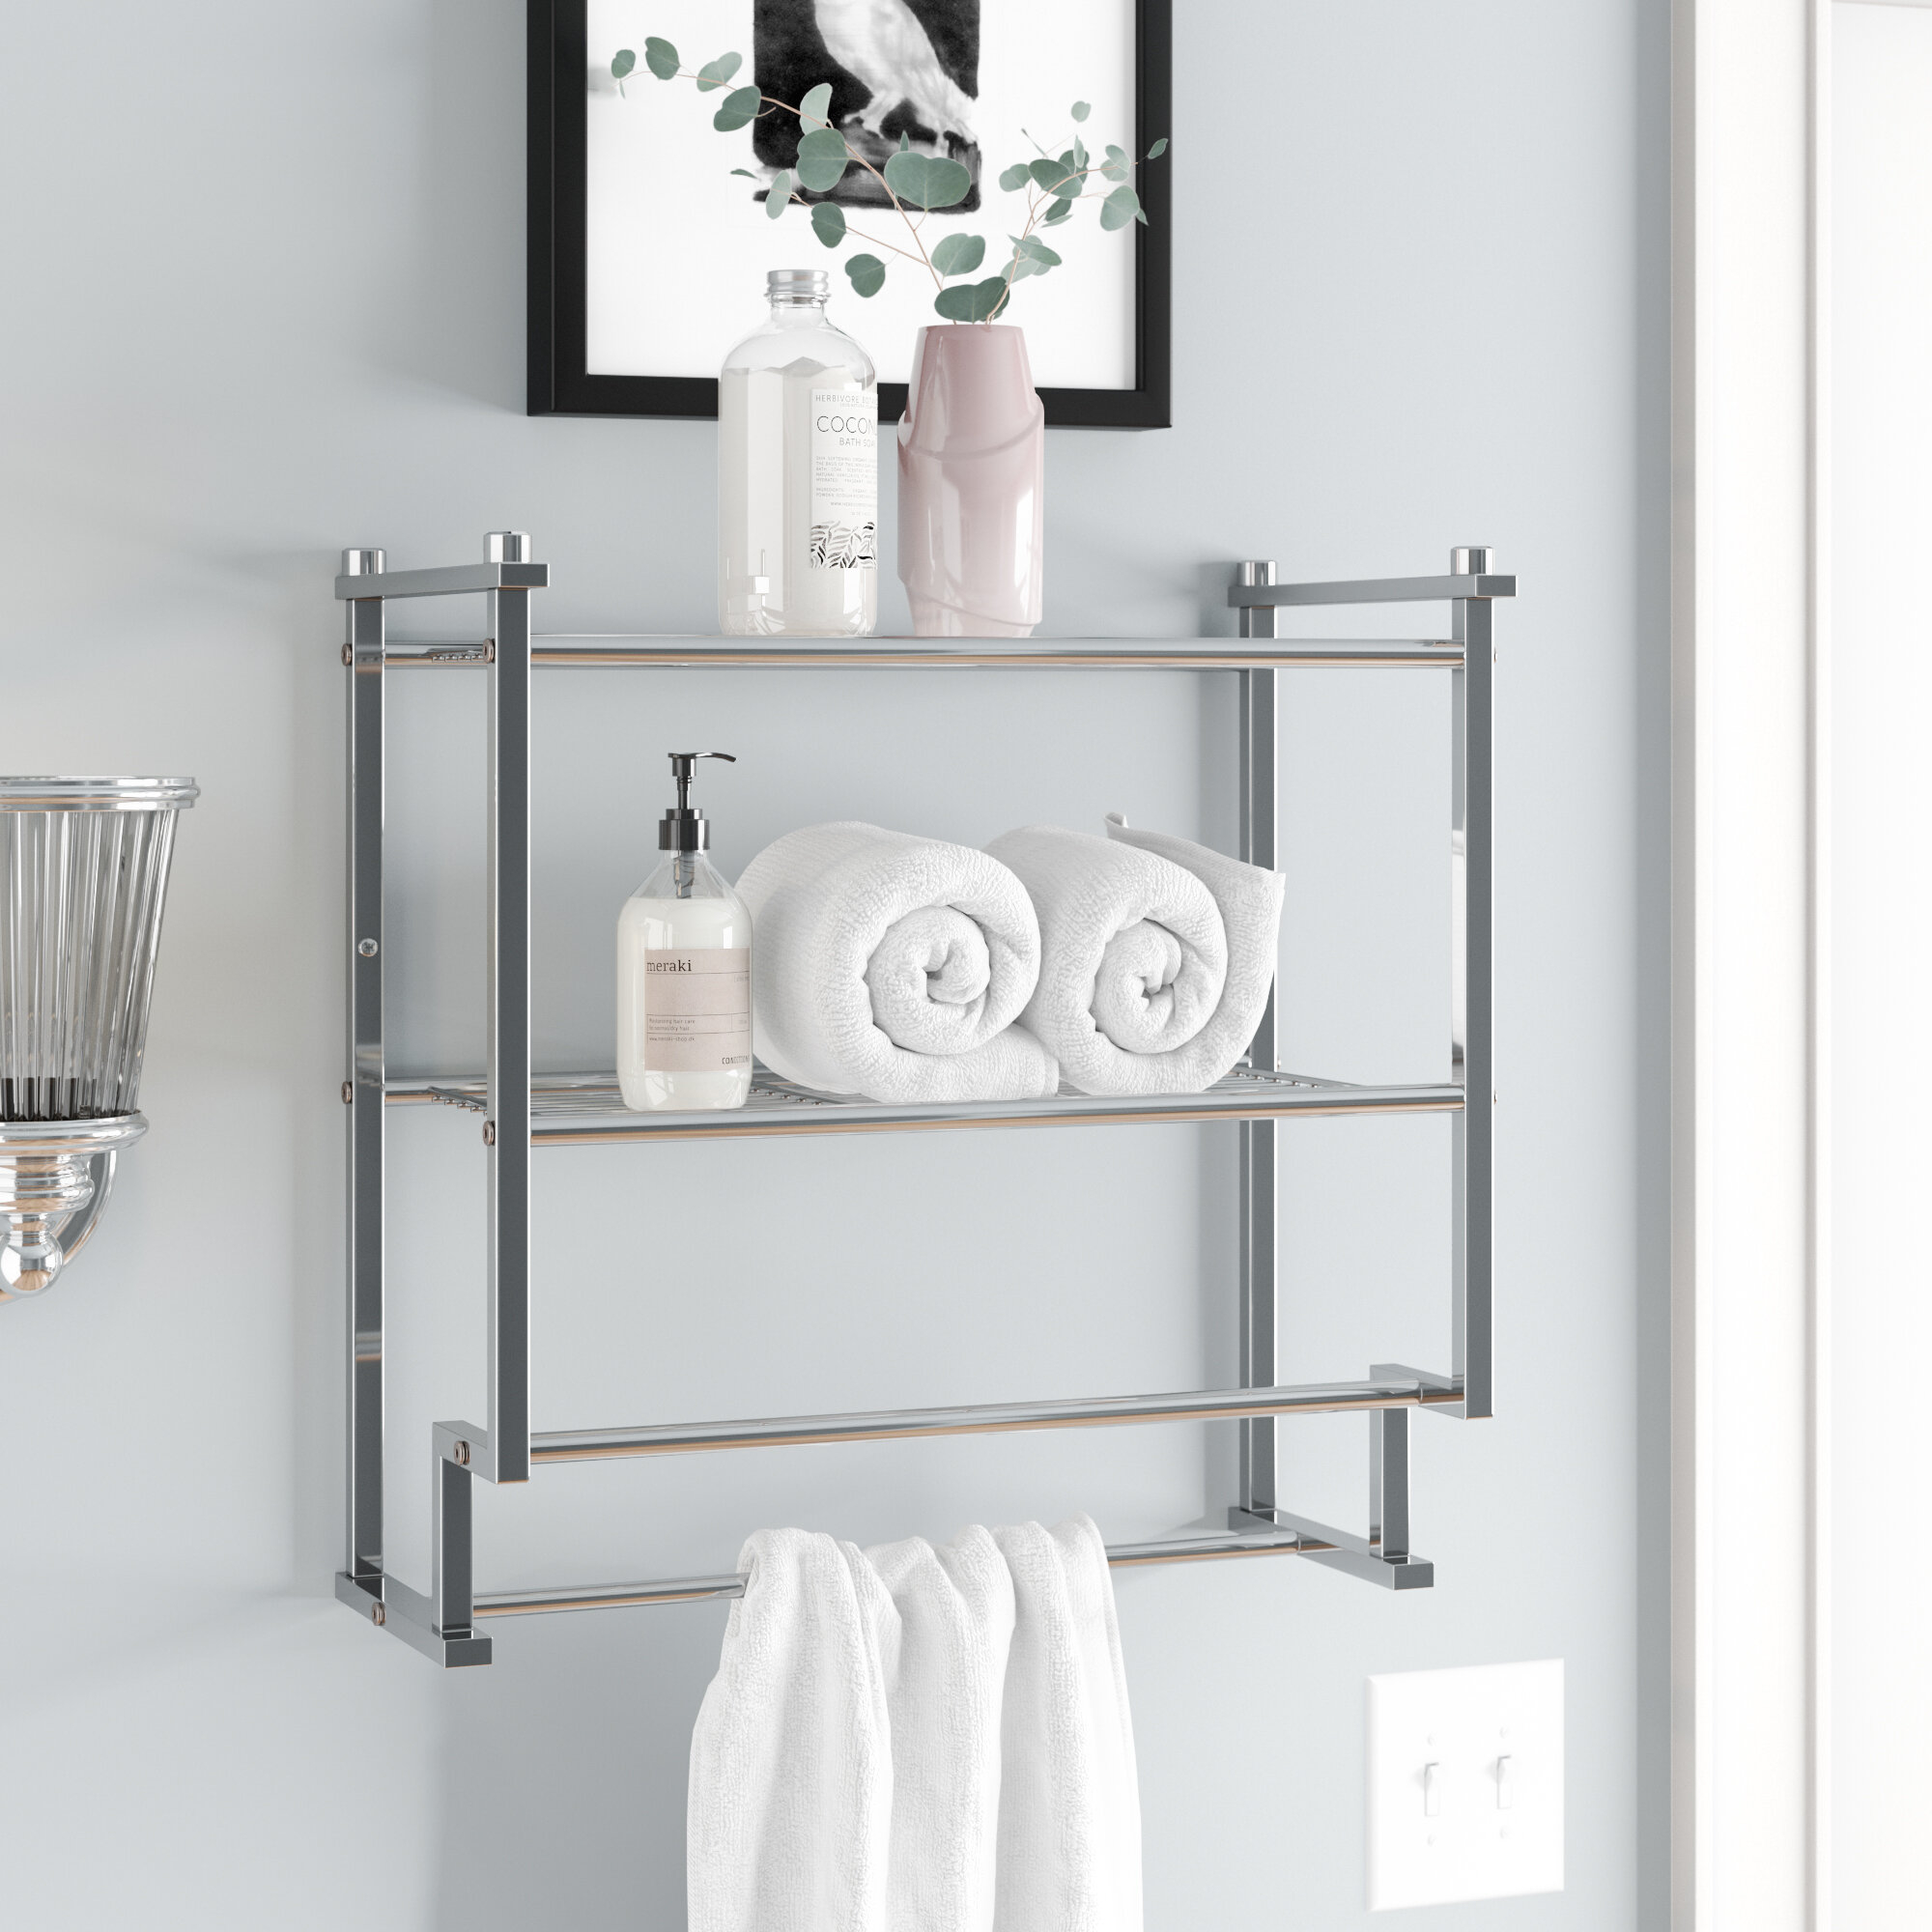 Details about   Floating Shelves With Towel Bar Wall Mounted Storage Shelves Organizer Bathroom 